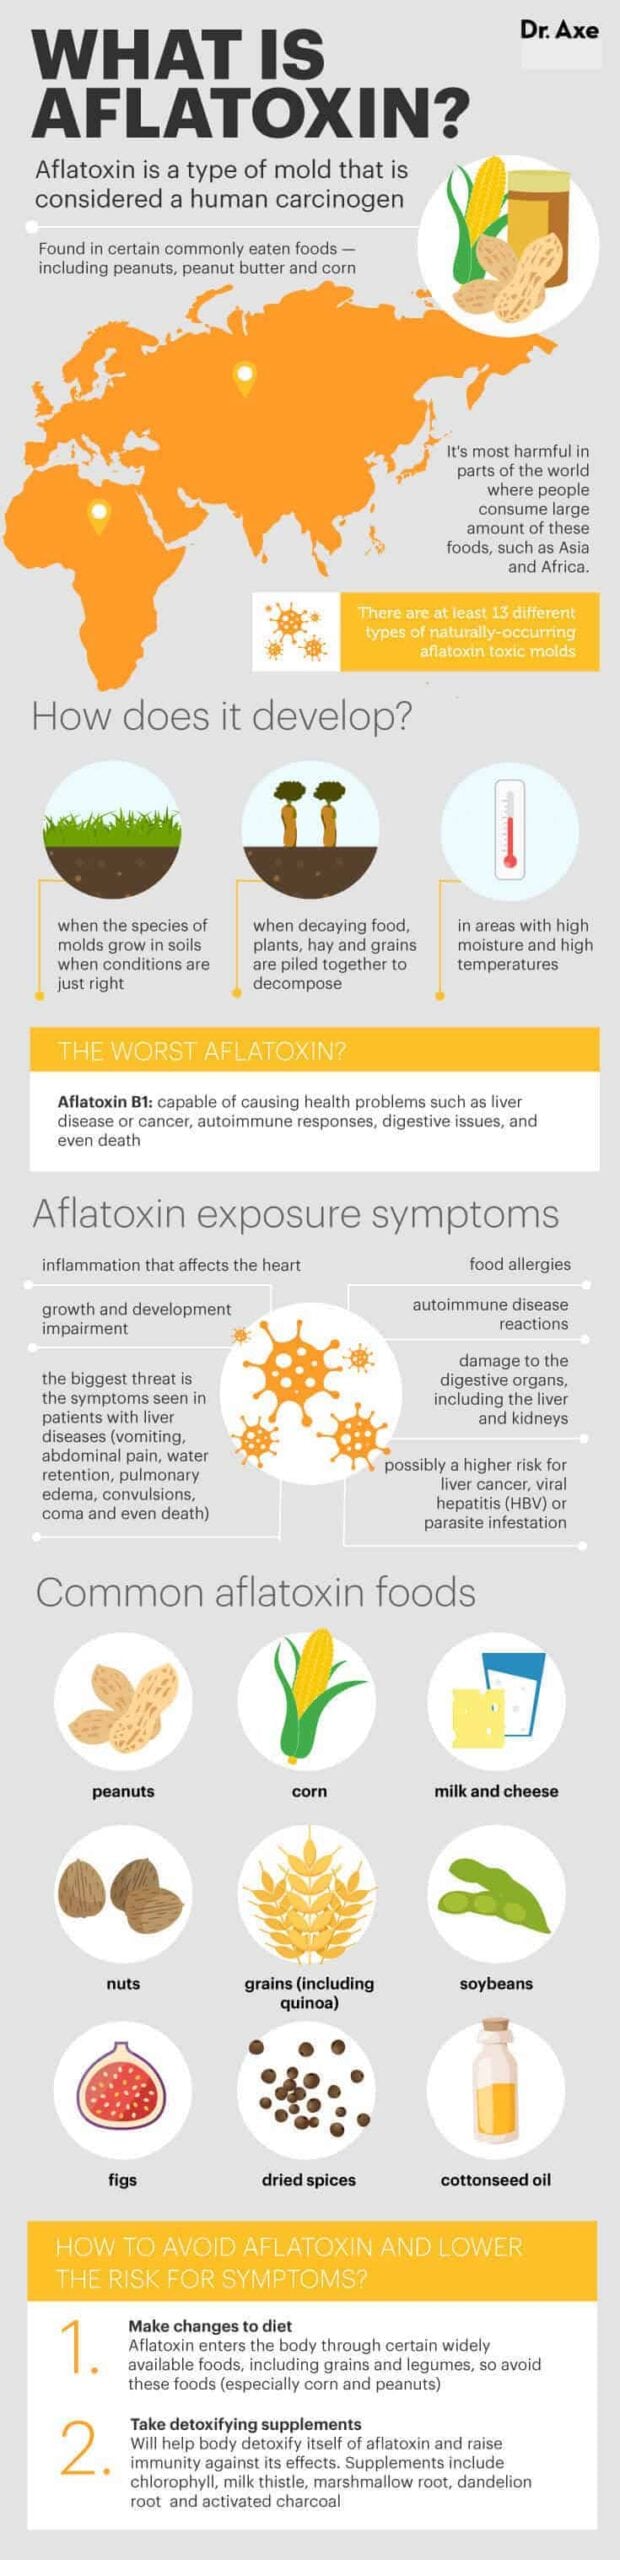 What is aflatoxin? - Dr. Axe